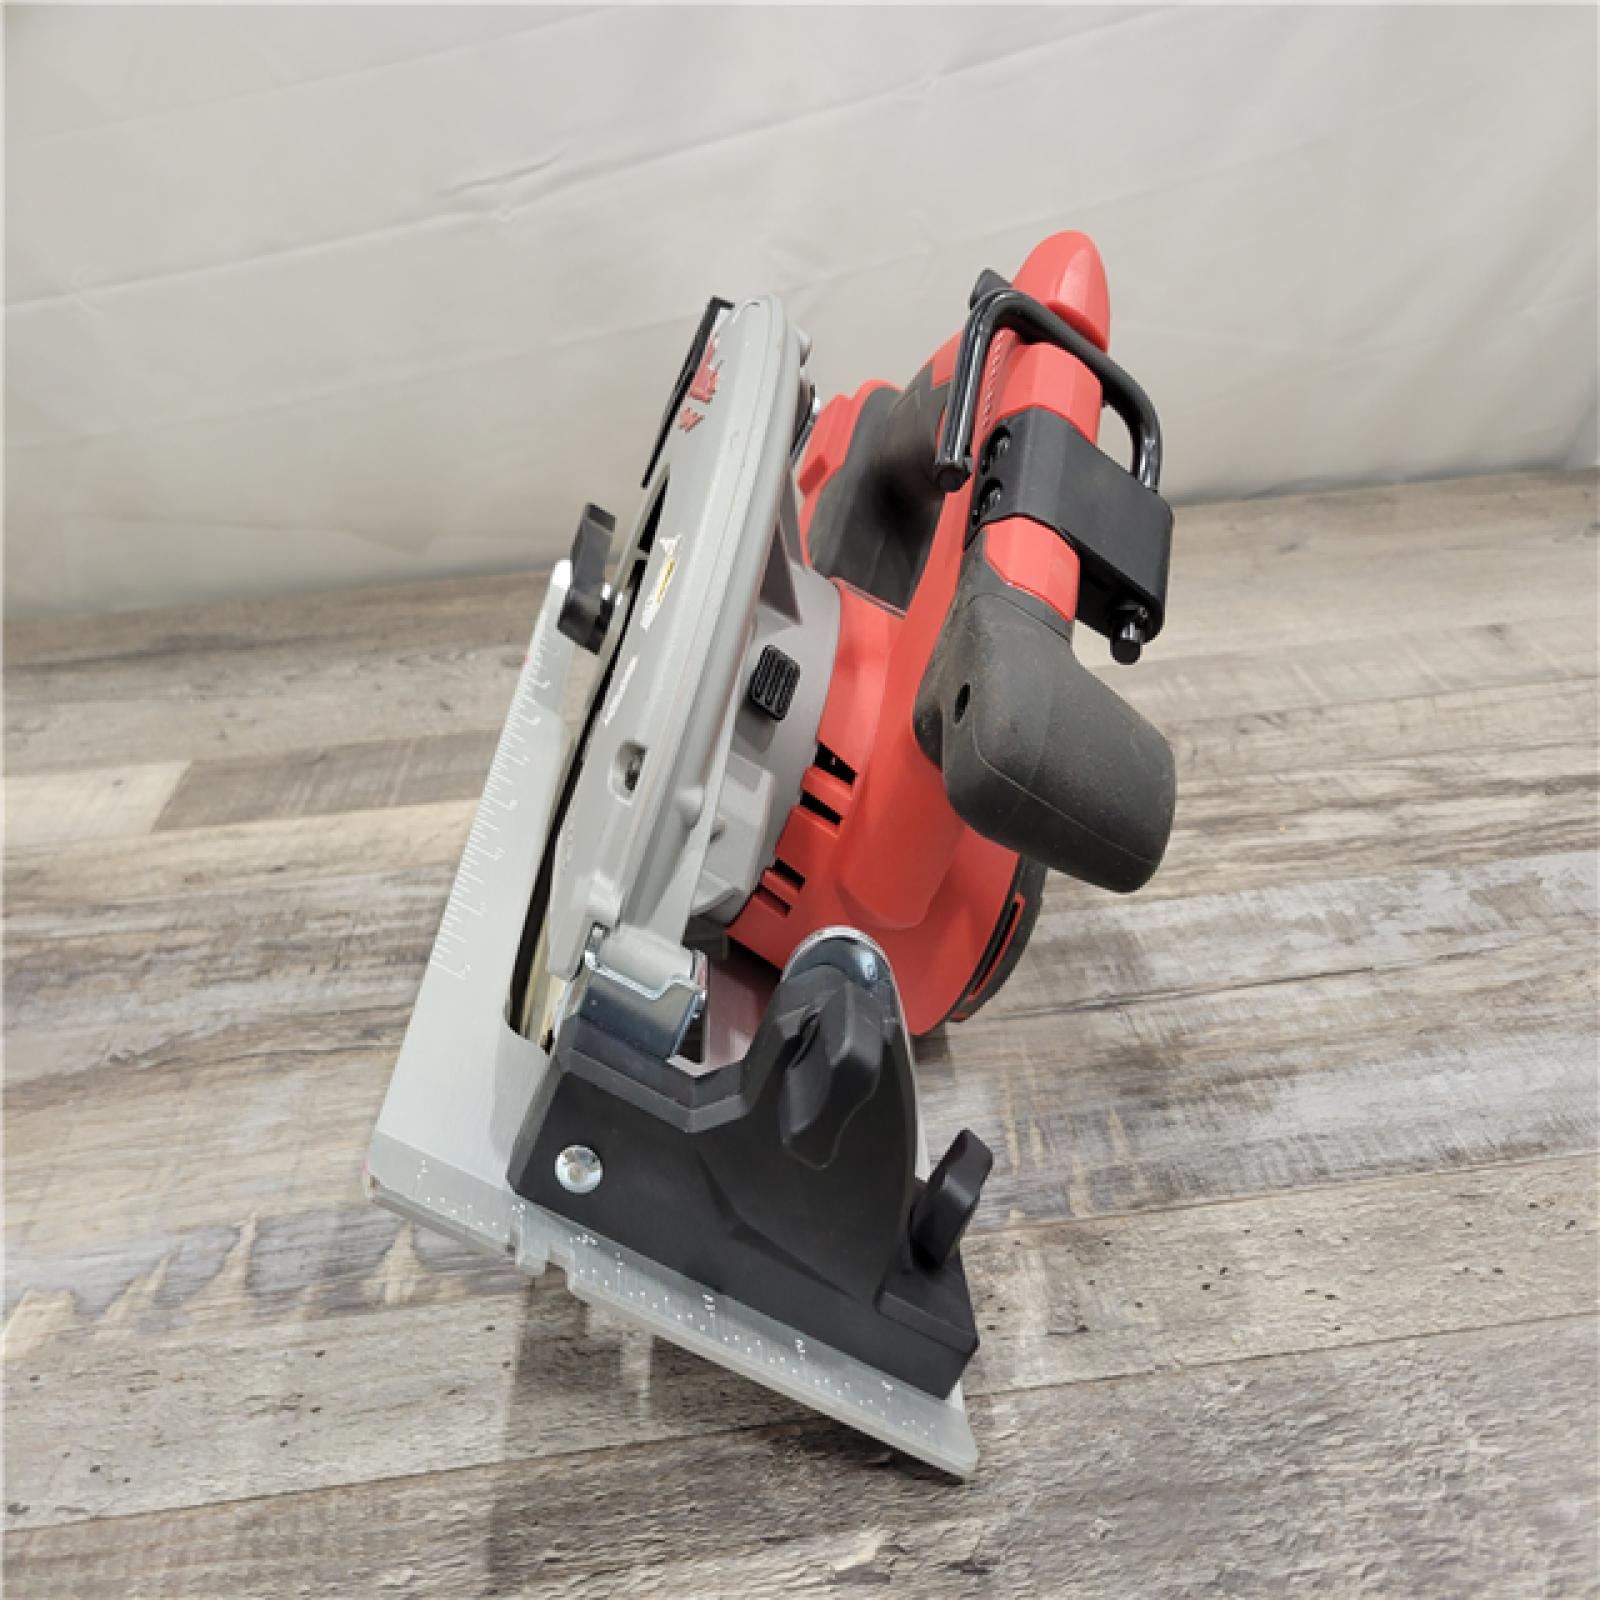 AS-IS Milwaukee M18 Cordless Brushless 7-1/4 in. Circular Saw (Tool Only)